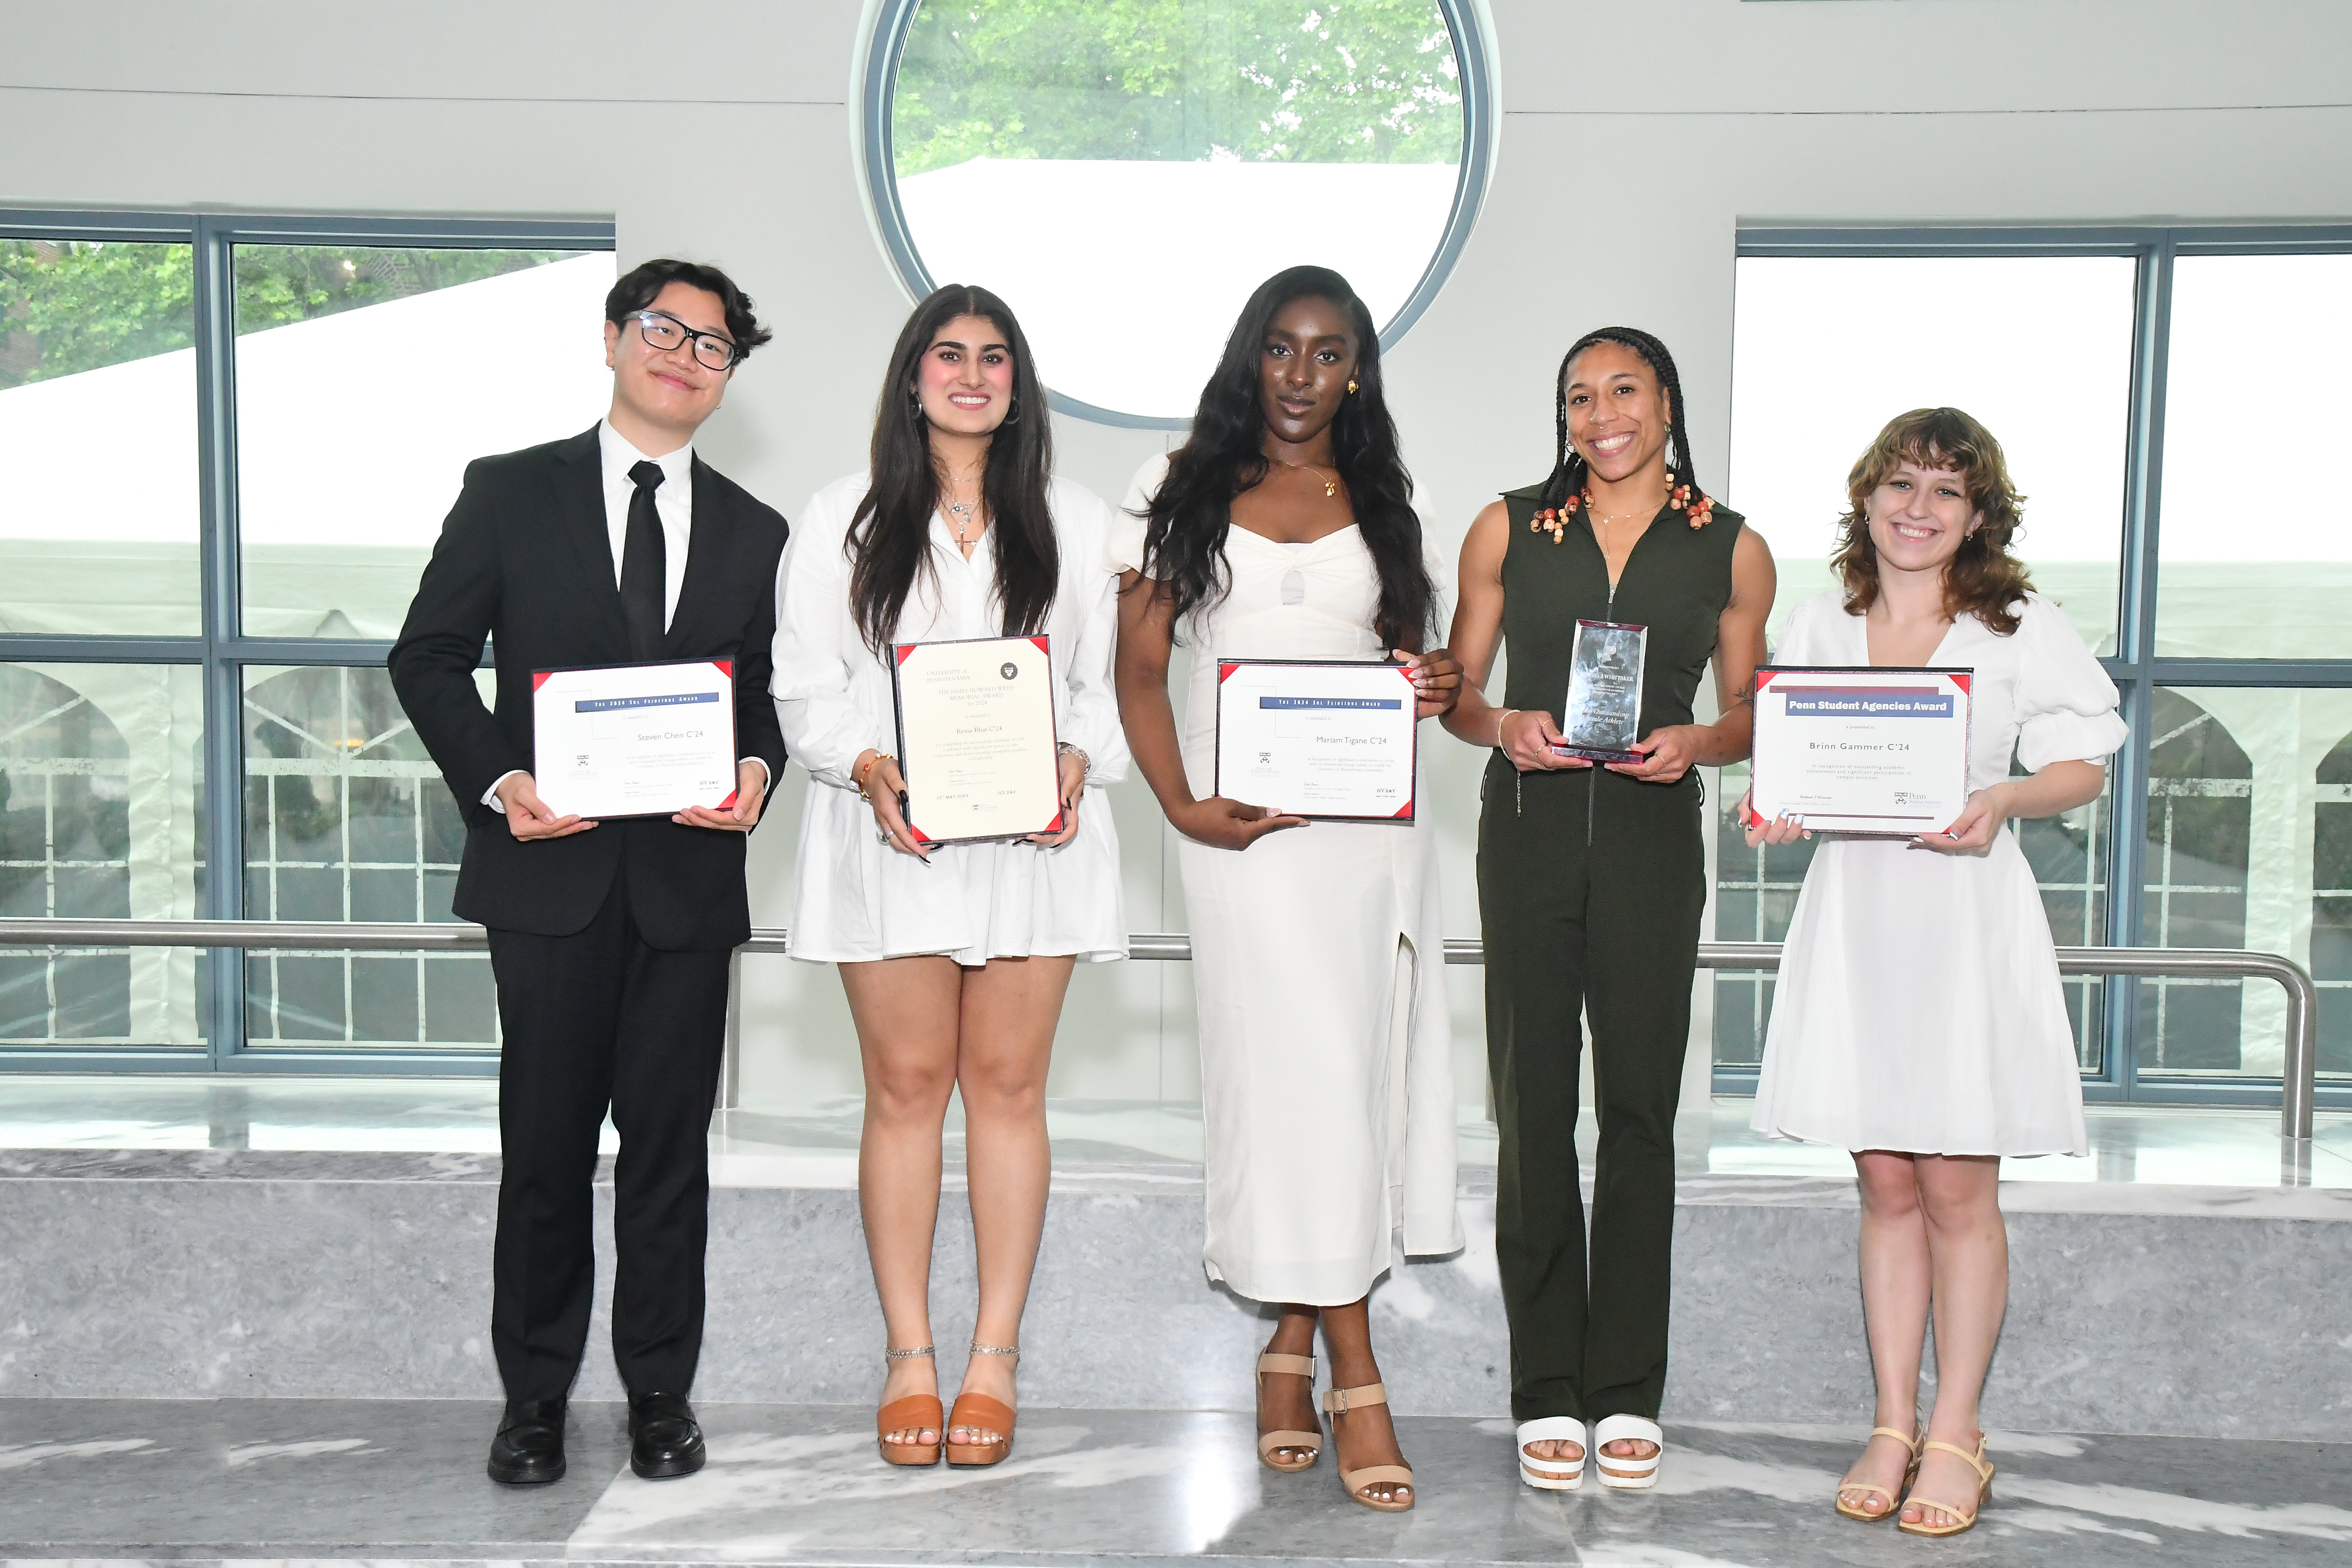 Four students stand with awards